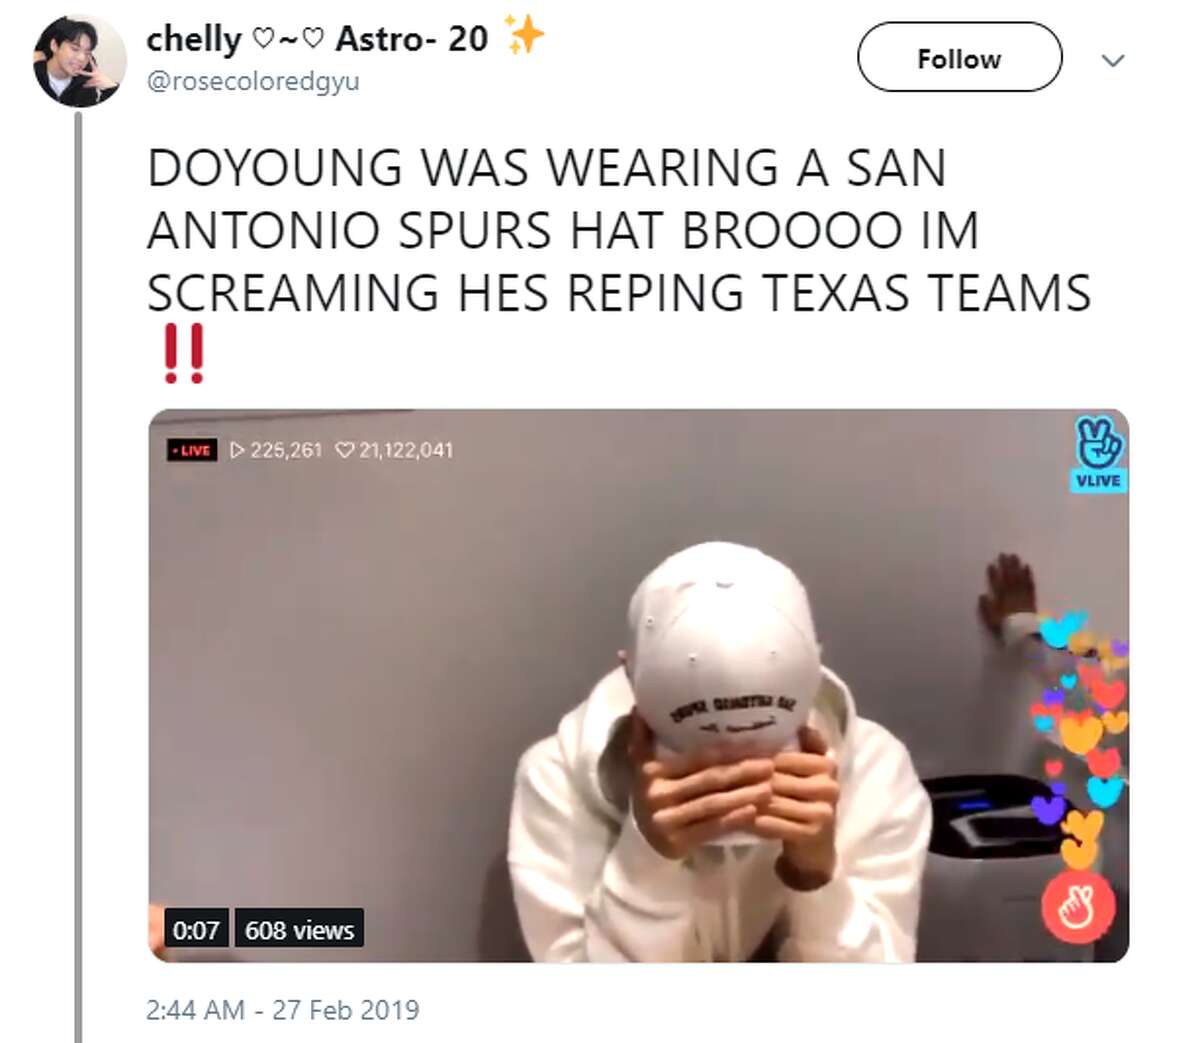 @rosecoloredgyu: DOYOUNG WAS WEARING A SAN ANTONIO SPURS HAT BROOOO IM SCREAMING HES REPING TEXAS TEAMS